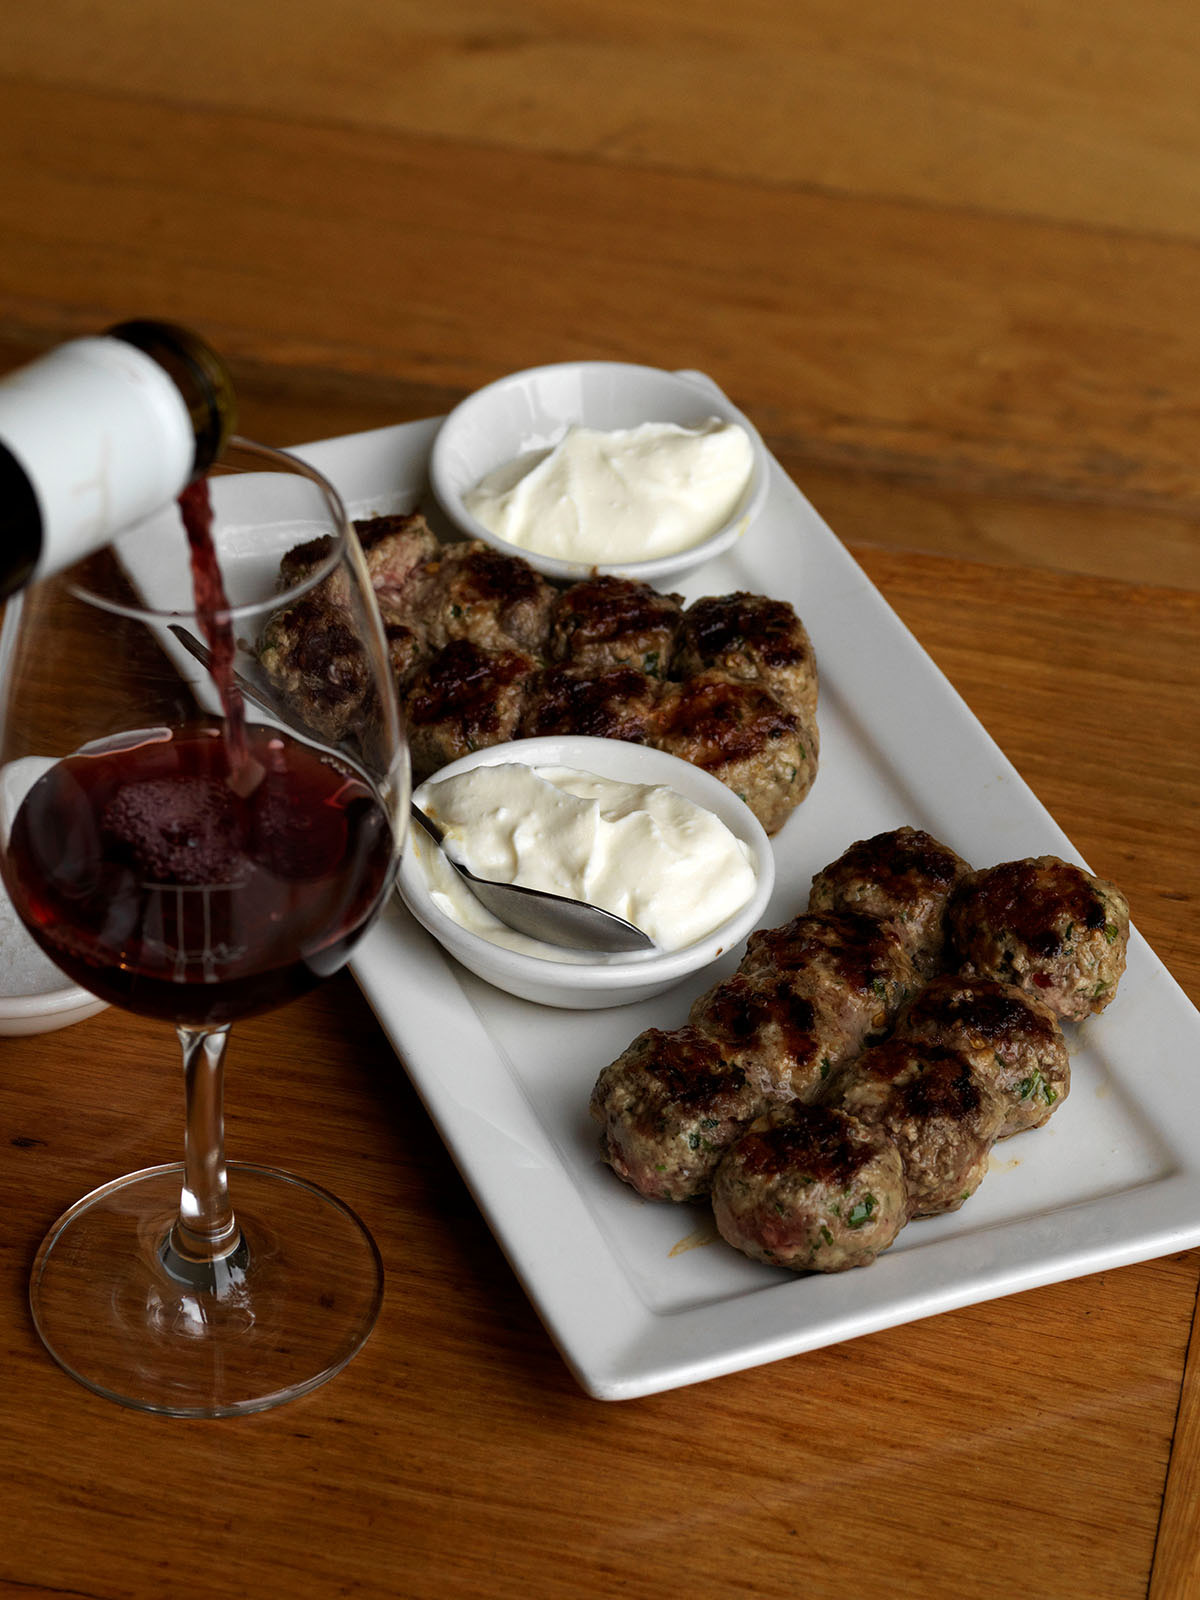 Spicy, juicy meatballs with yoghurt dipping sauce (and wine, of course)